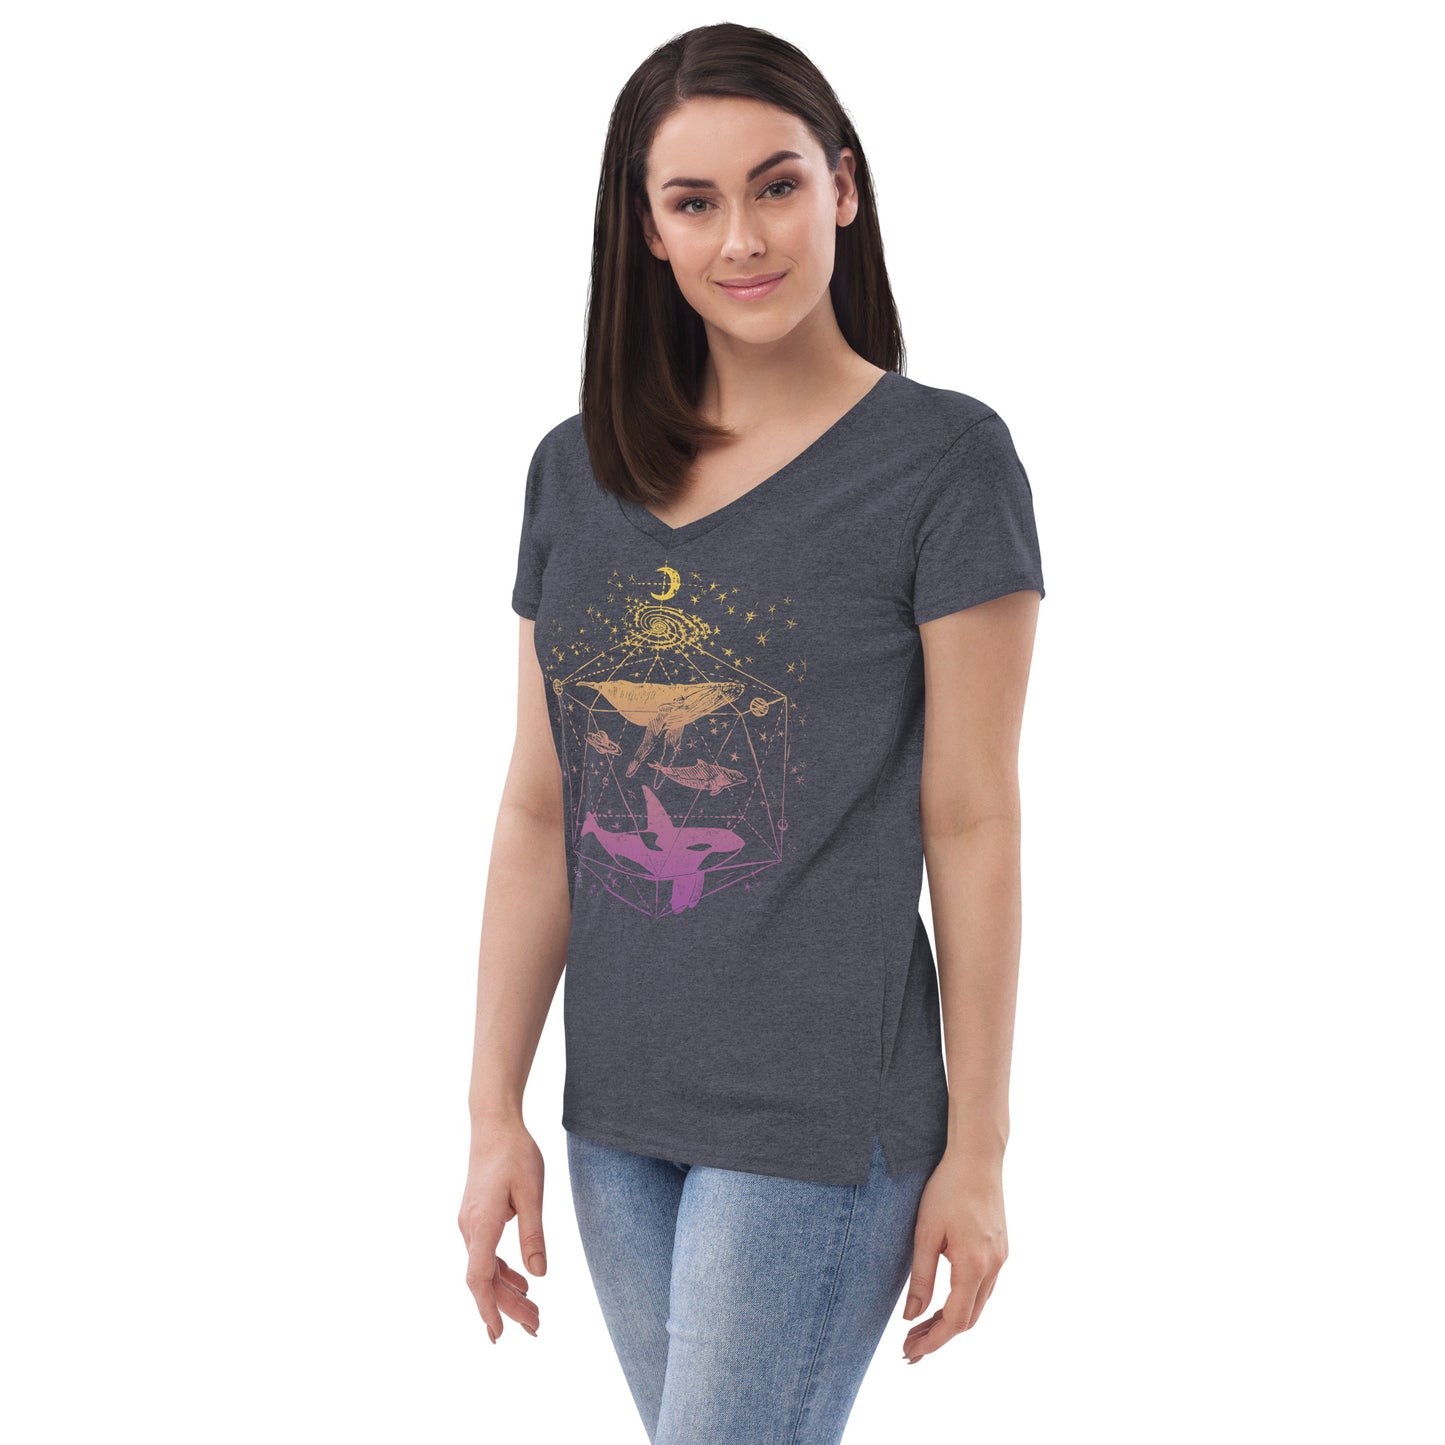 Galactic Whale in Colour Ladies Eco V-Neck T-Shirt